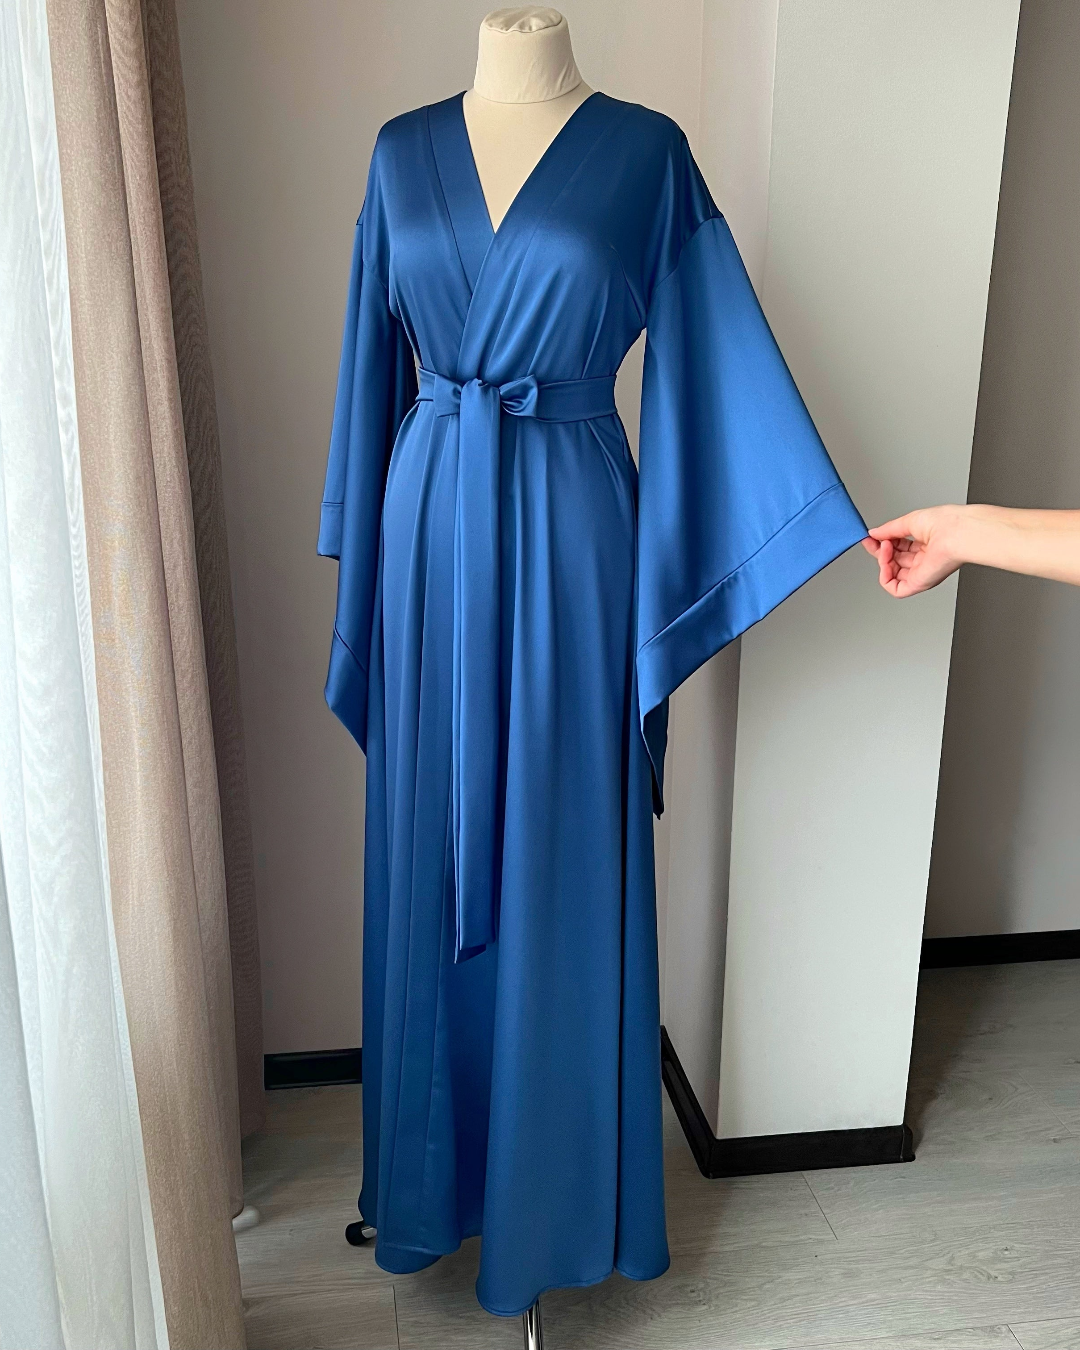 a woman's hand is pointing at a blue robe on a mannequin